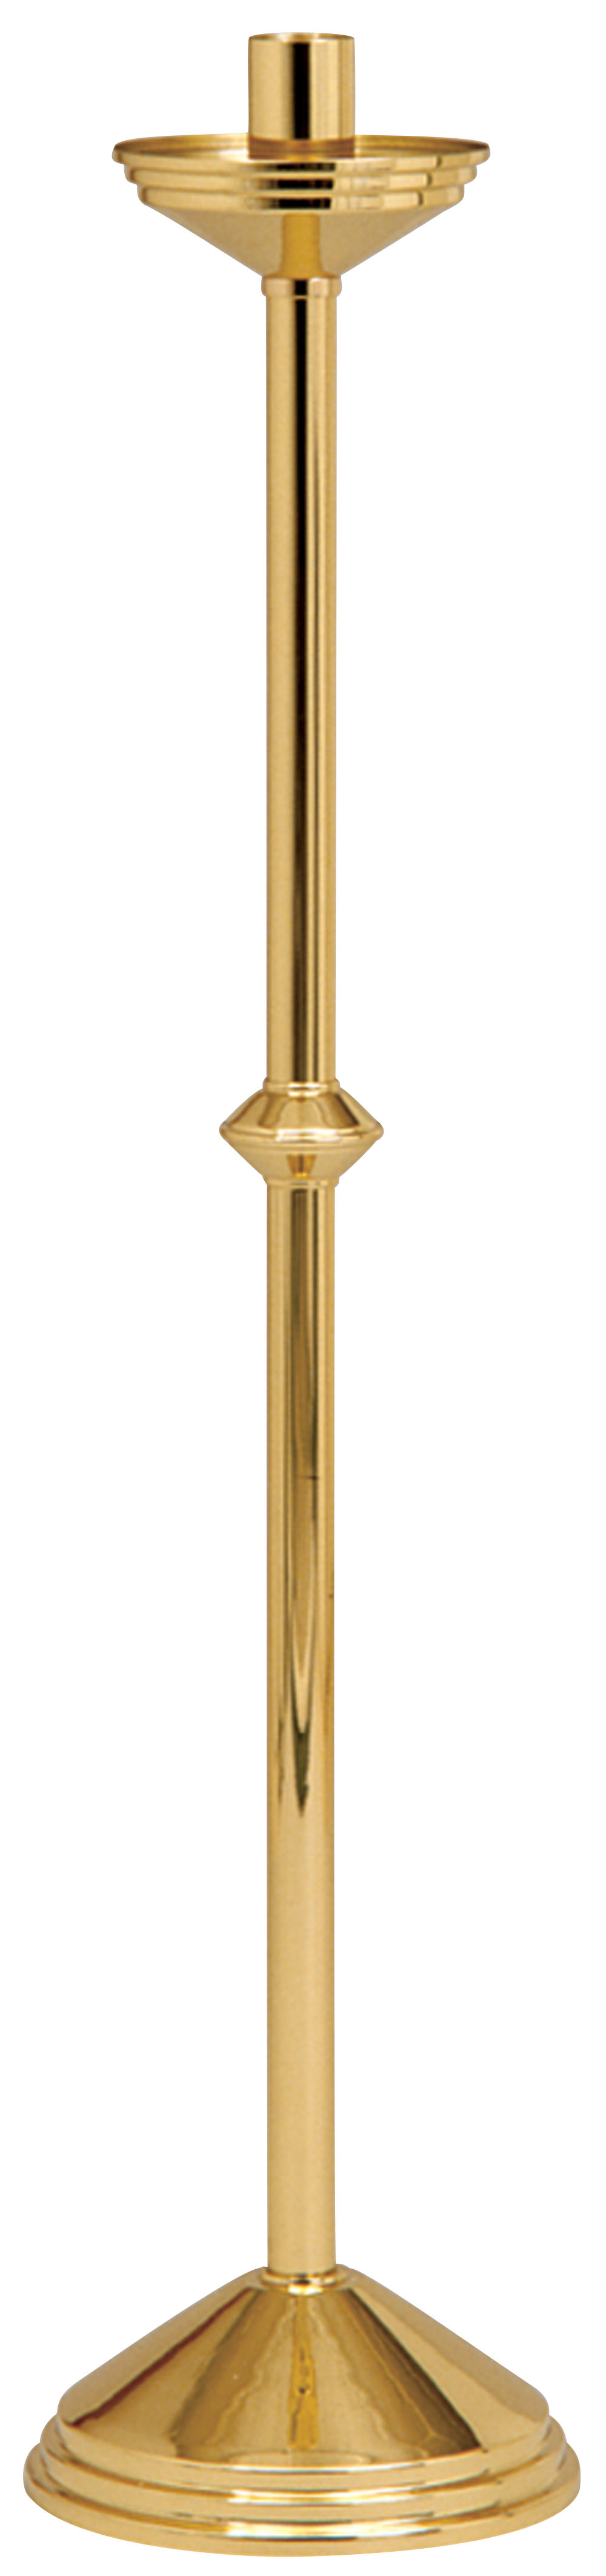 Paschal Candlestick 44 inch 1 15/16 inch Socket